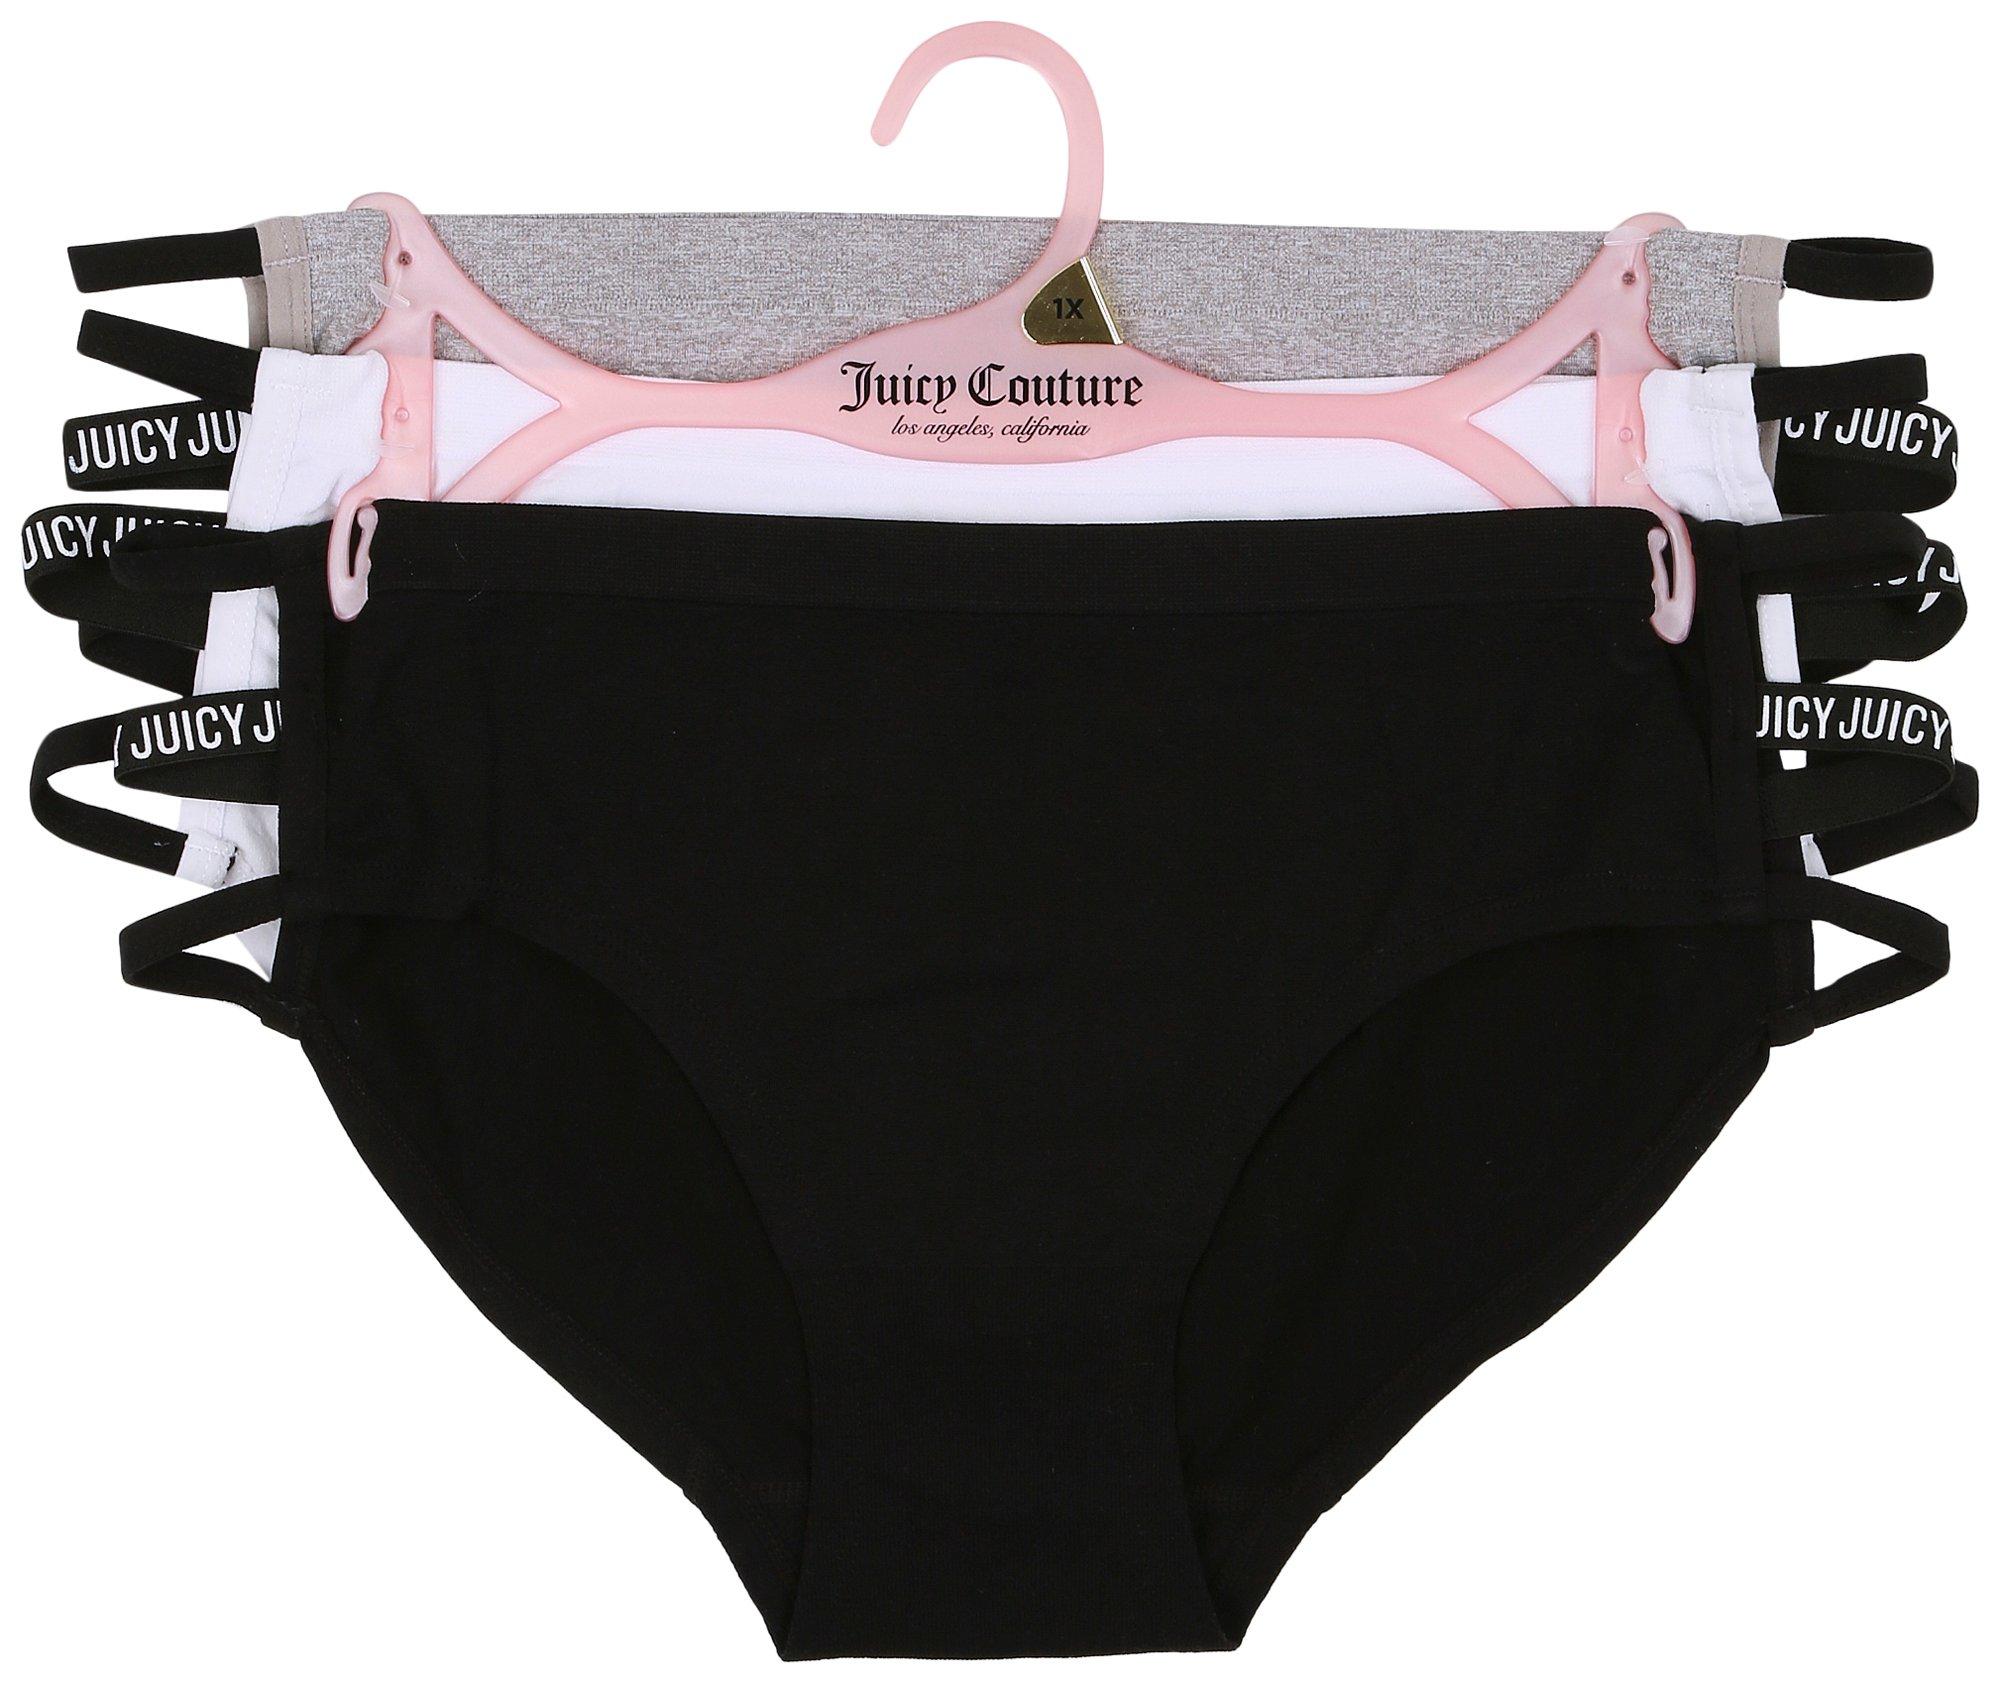 Juicy Couture Cherry Panties for Women